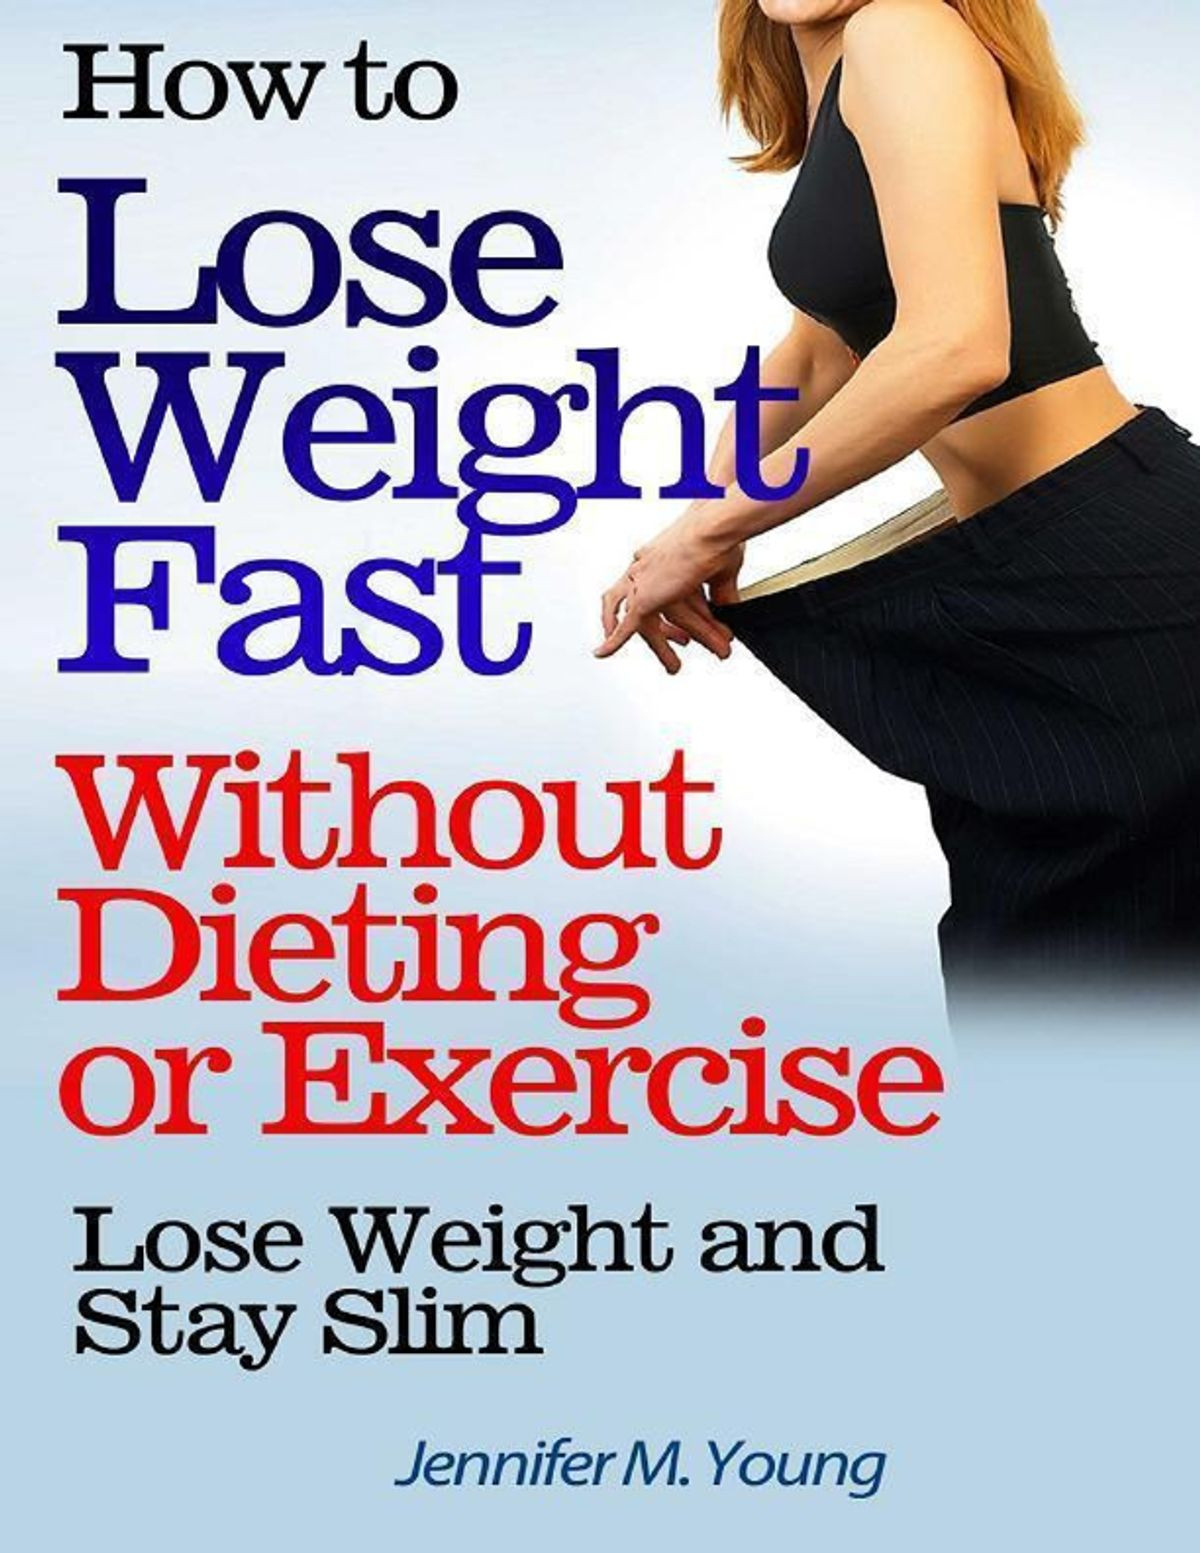 How To Lose Weight Without Exercise
 How to Lose Weight Fast Without Dieting or Exercise Lose